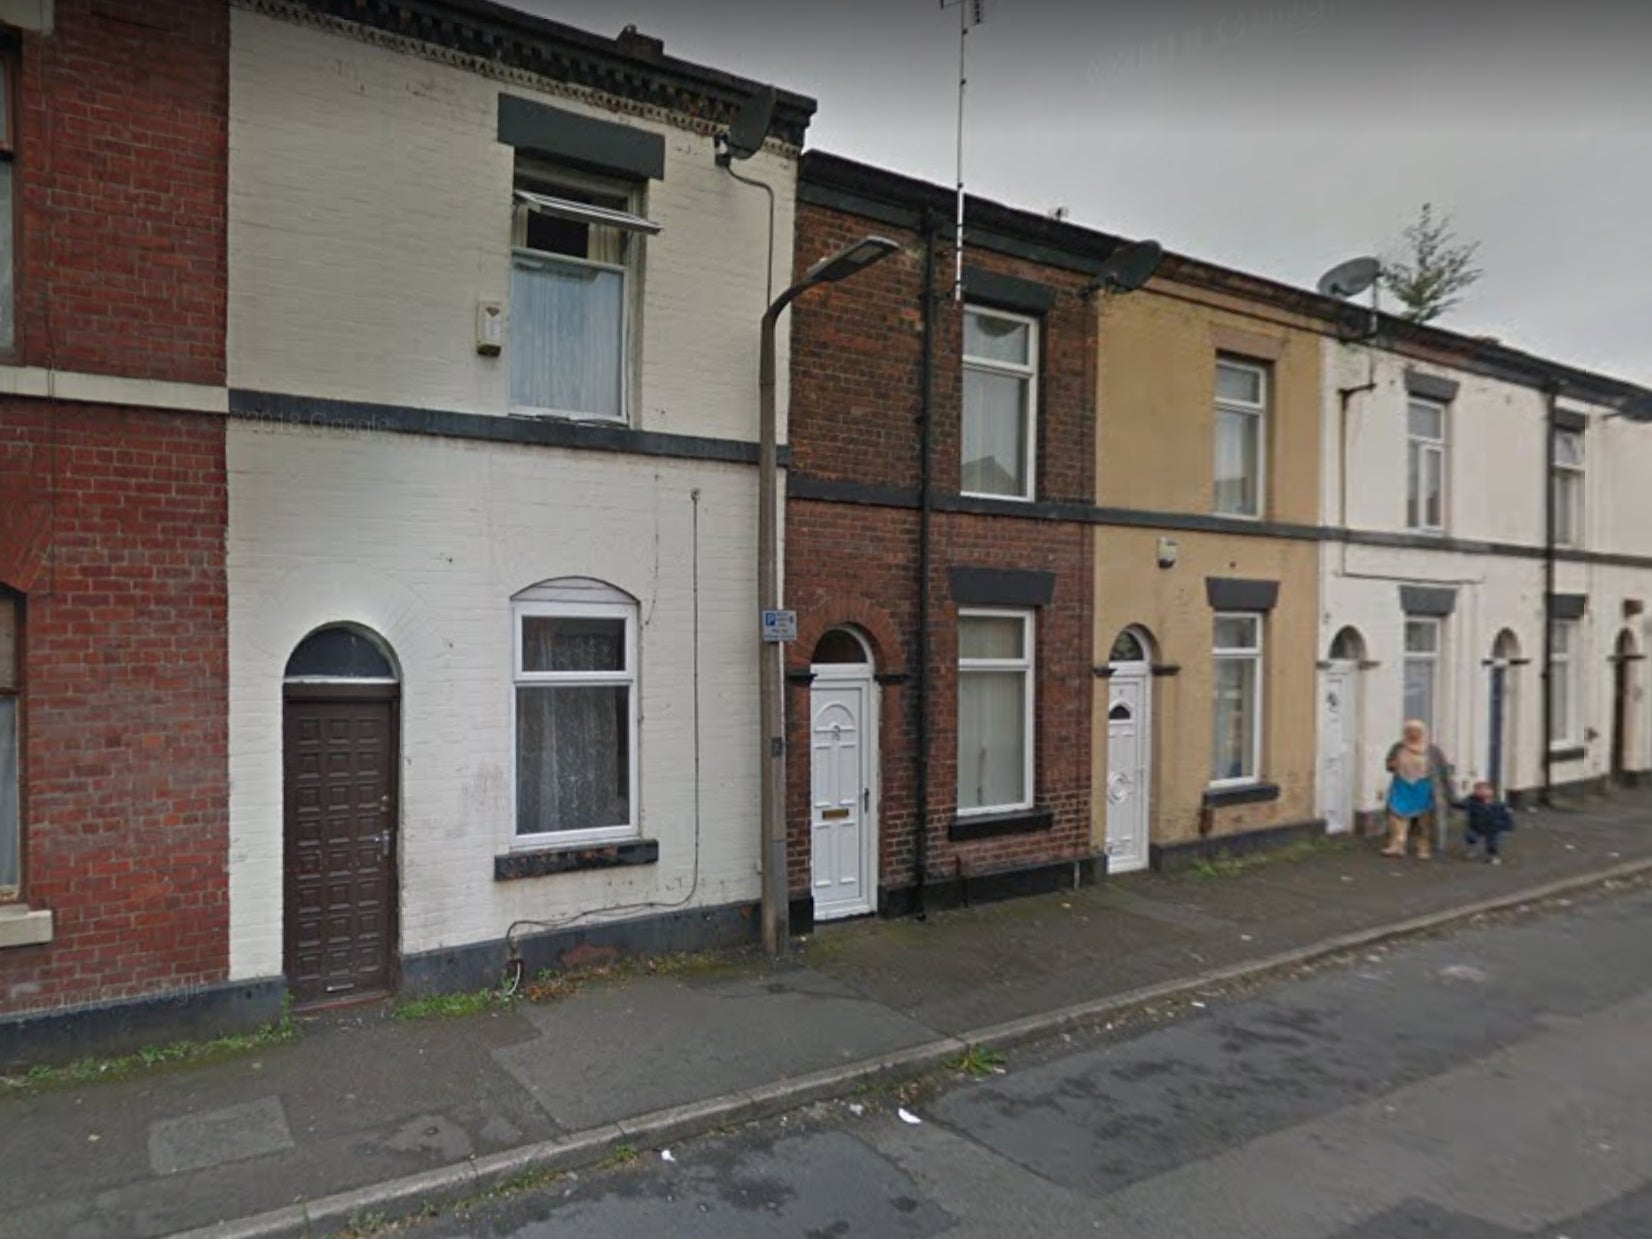 Police were called to an address on East Street, in Bury, just after 7.30pm on Friday